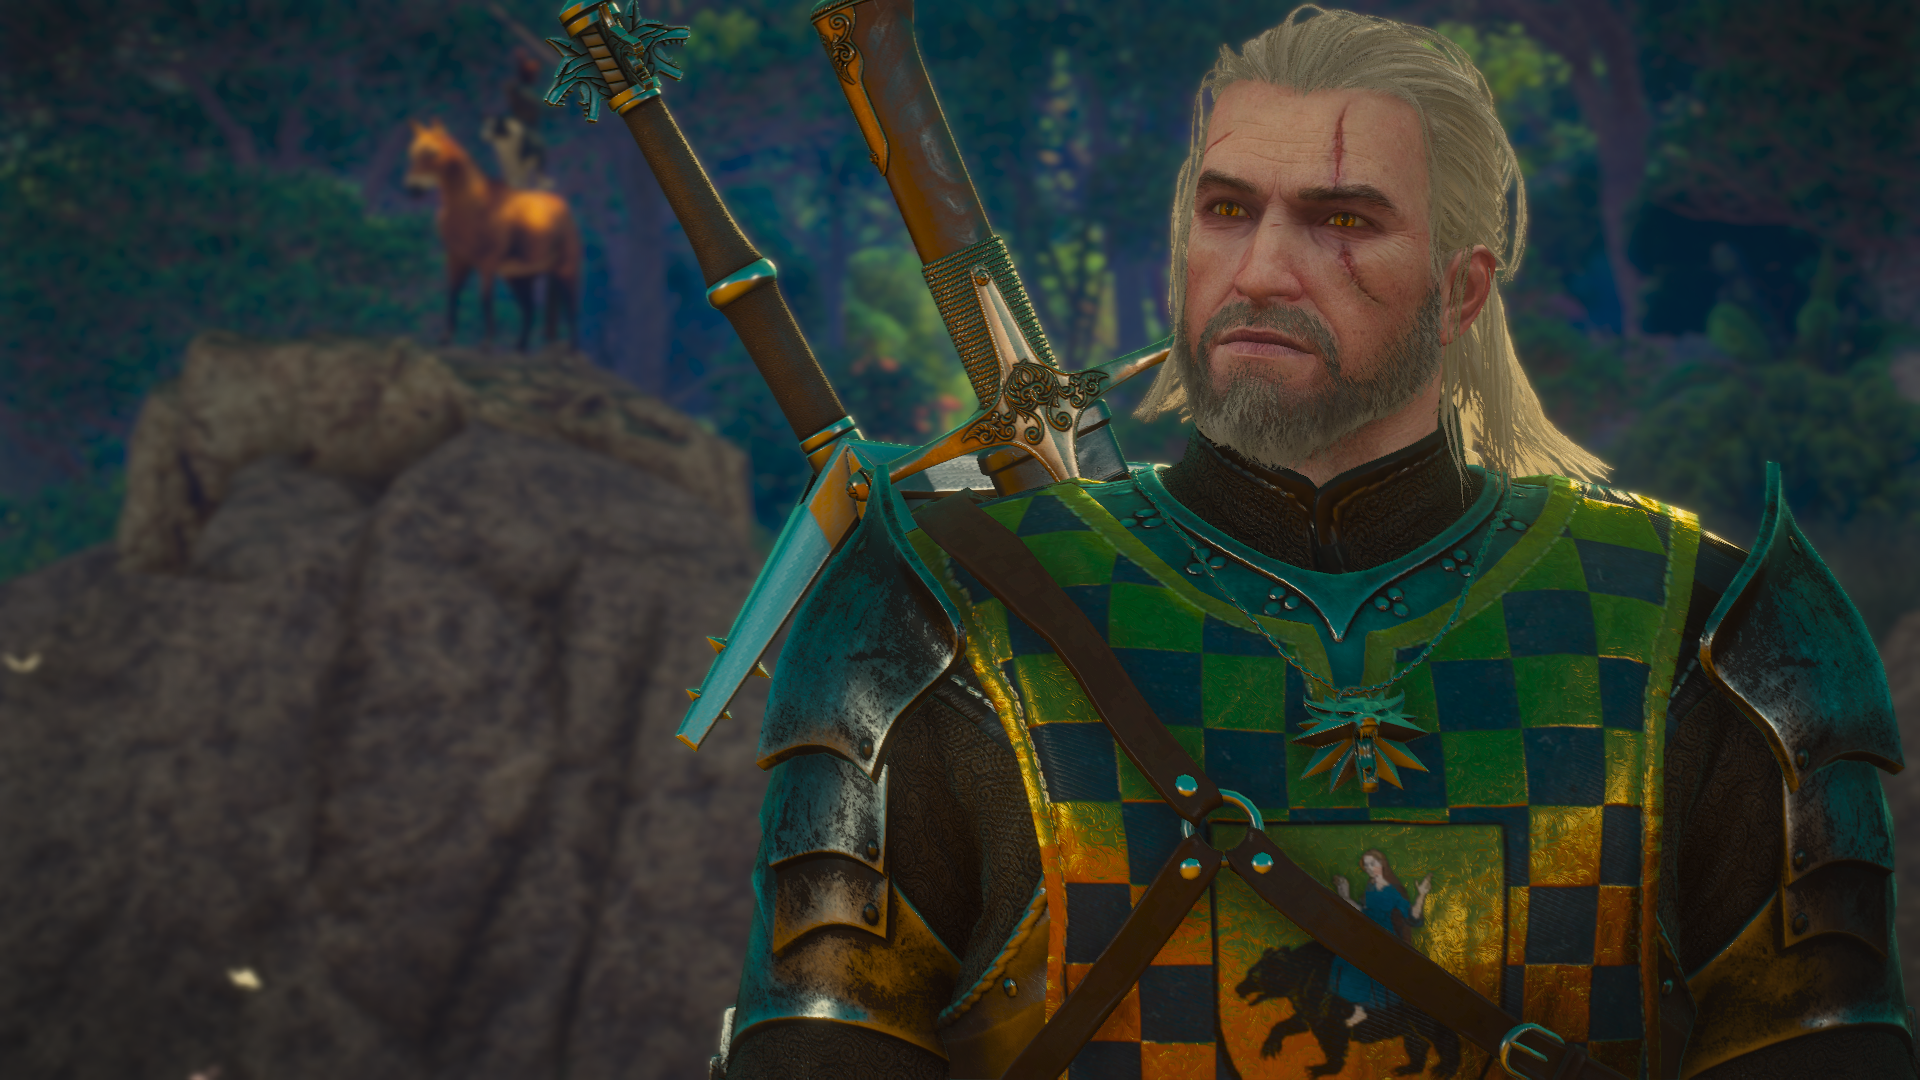 General 1920x1080 The Witcher 3: Wild Hunt video games CD Projekt RED Geralt of Rivia The Witcher The Witcher 3: Wild Hunt - Blood and Wine